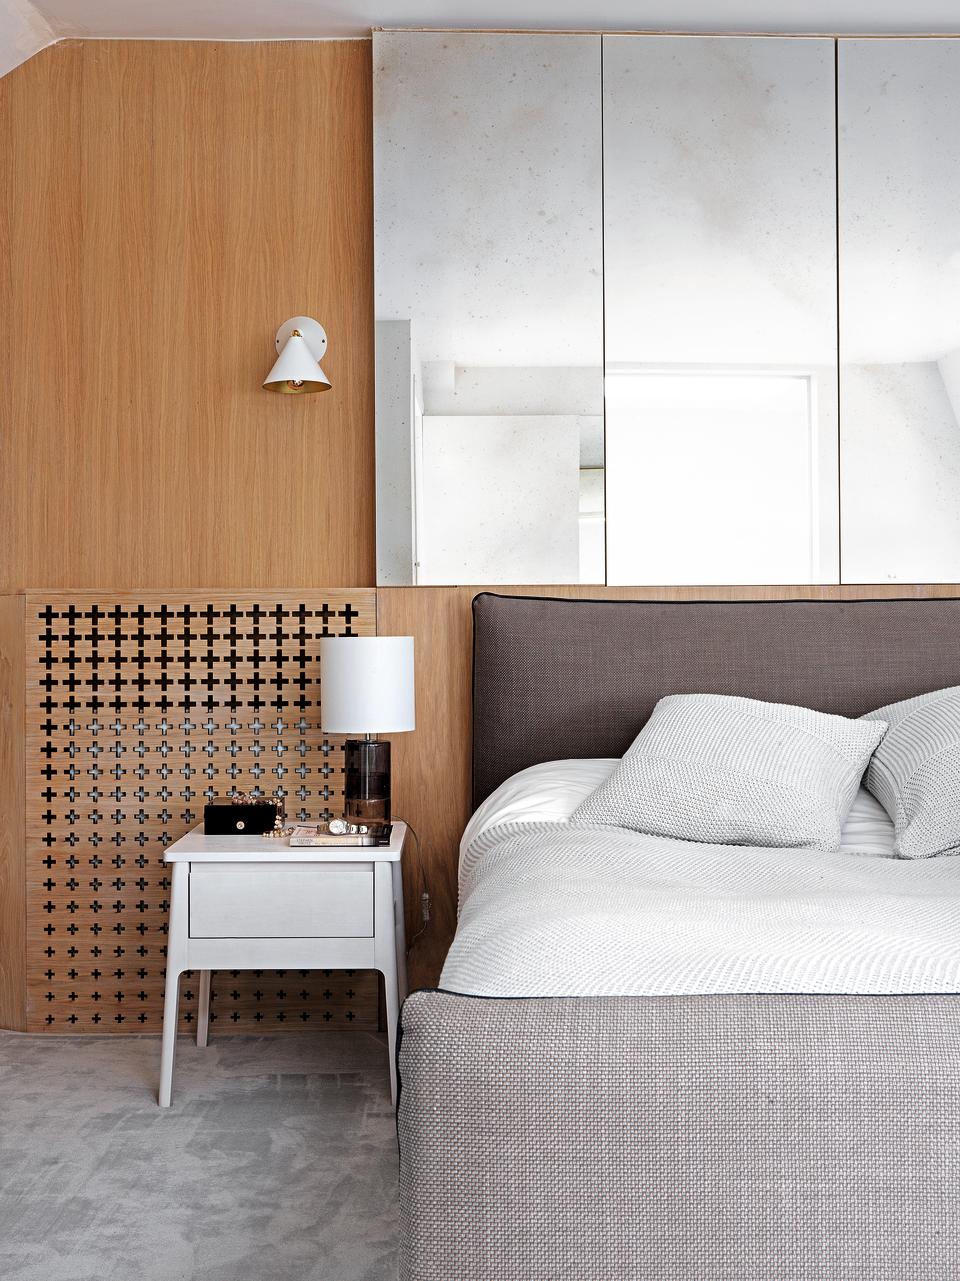 A neutral, minimalist bedroom with a wood panelled wall